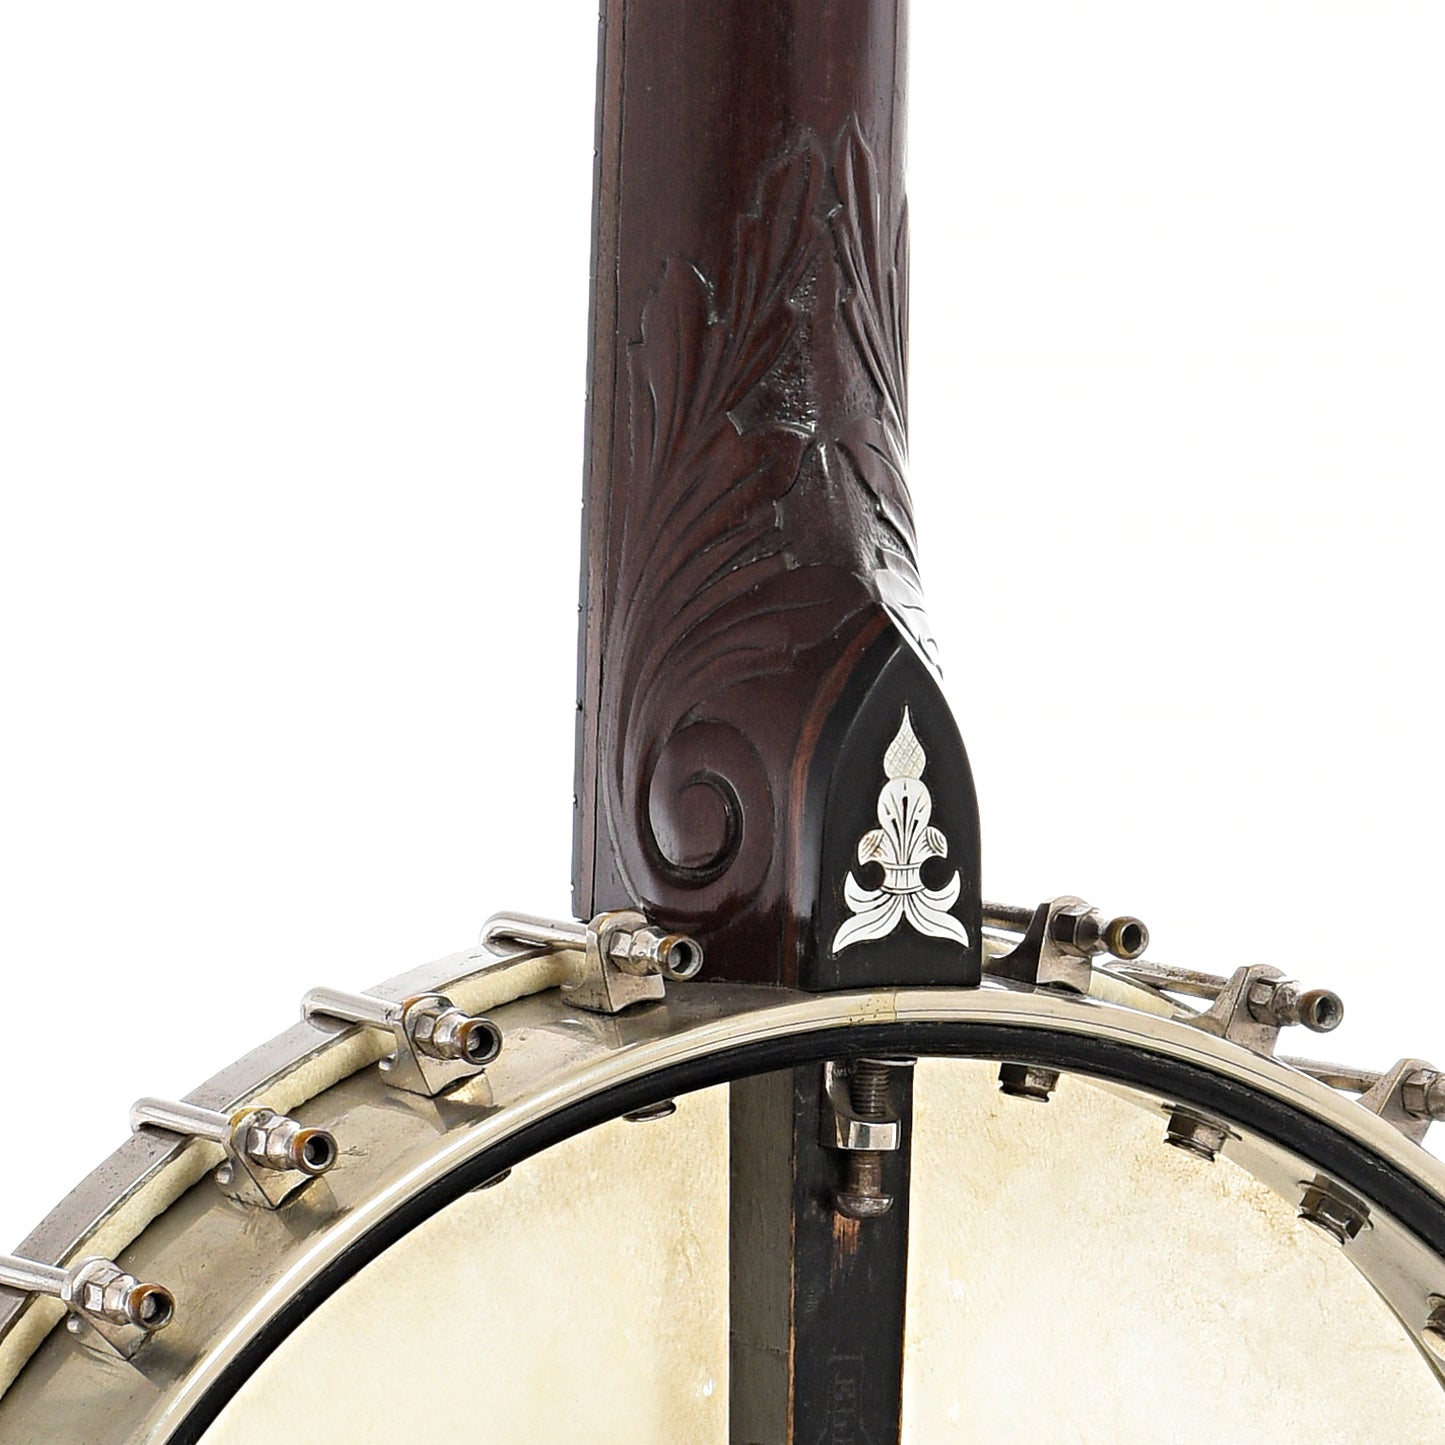 Neck joint of A.C. Fairbanks Electric #3 Openback Banjo (c.1892-93)